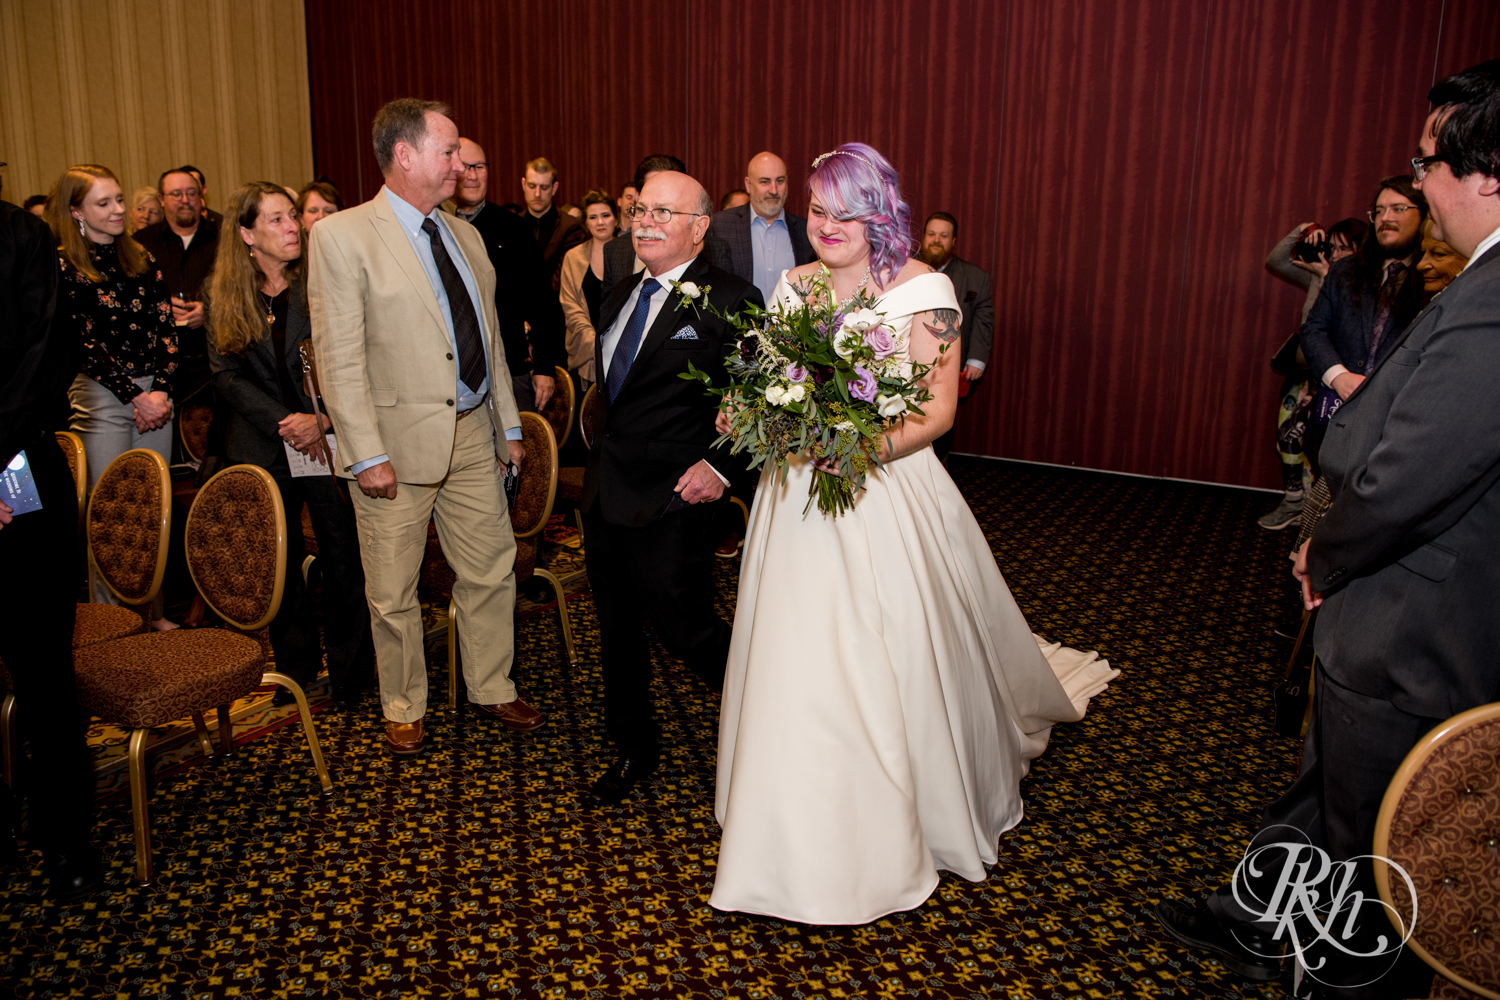 Bride with rainbow hair walking down the aisle at wedding ceremony at the Saint Paul Hotel in Saint Paul, Minnesota.